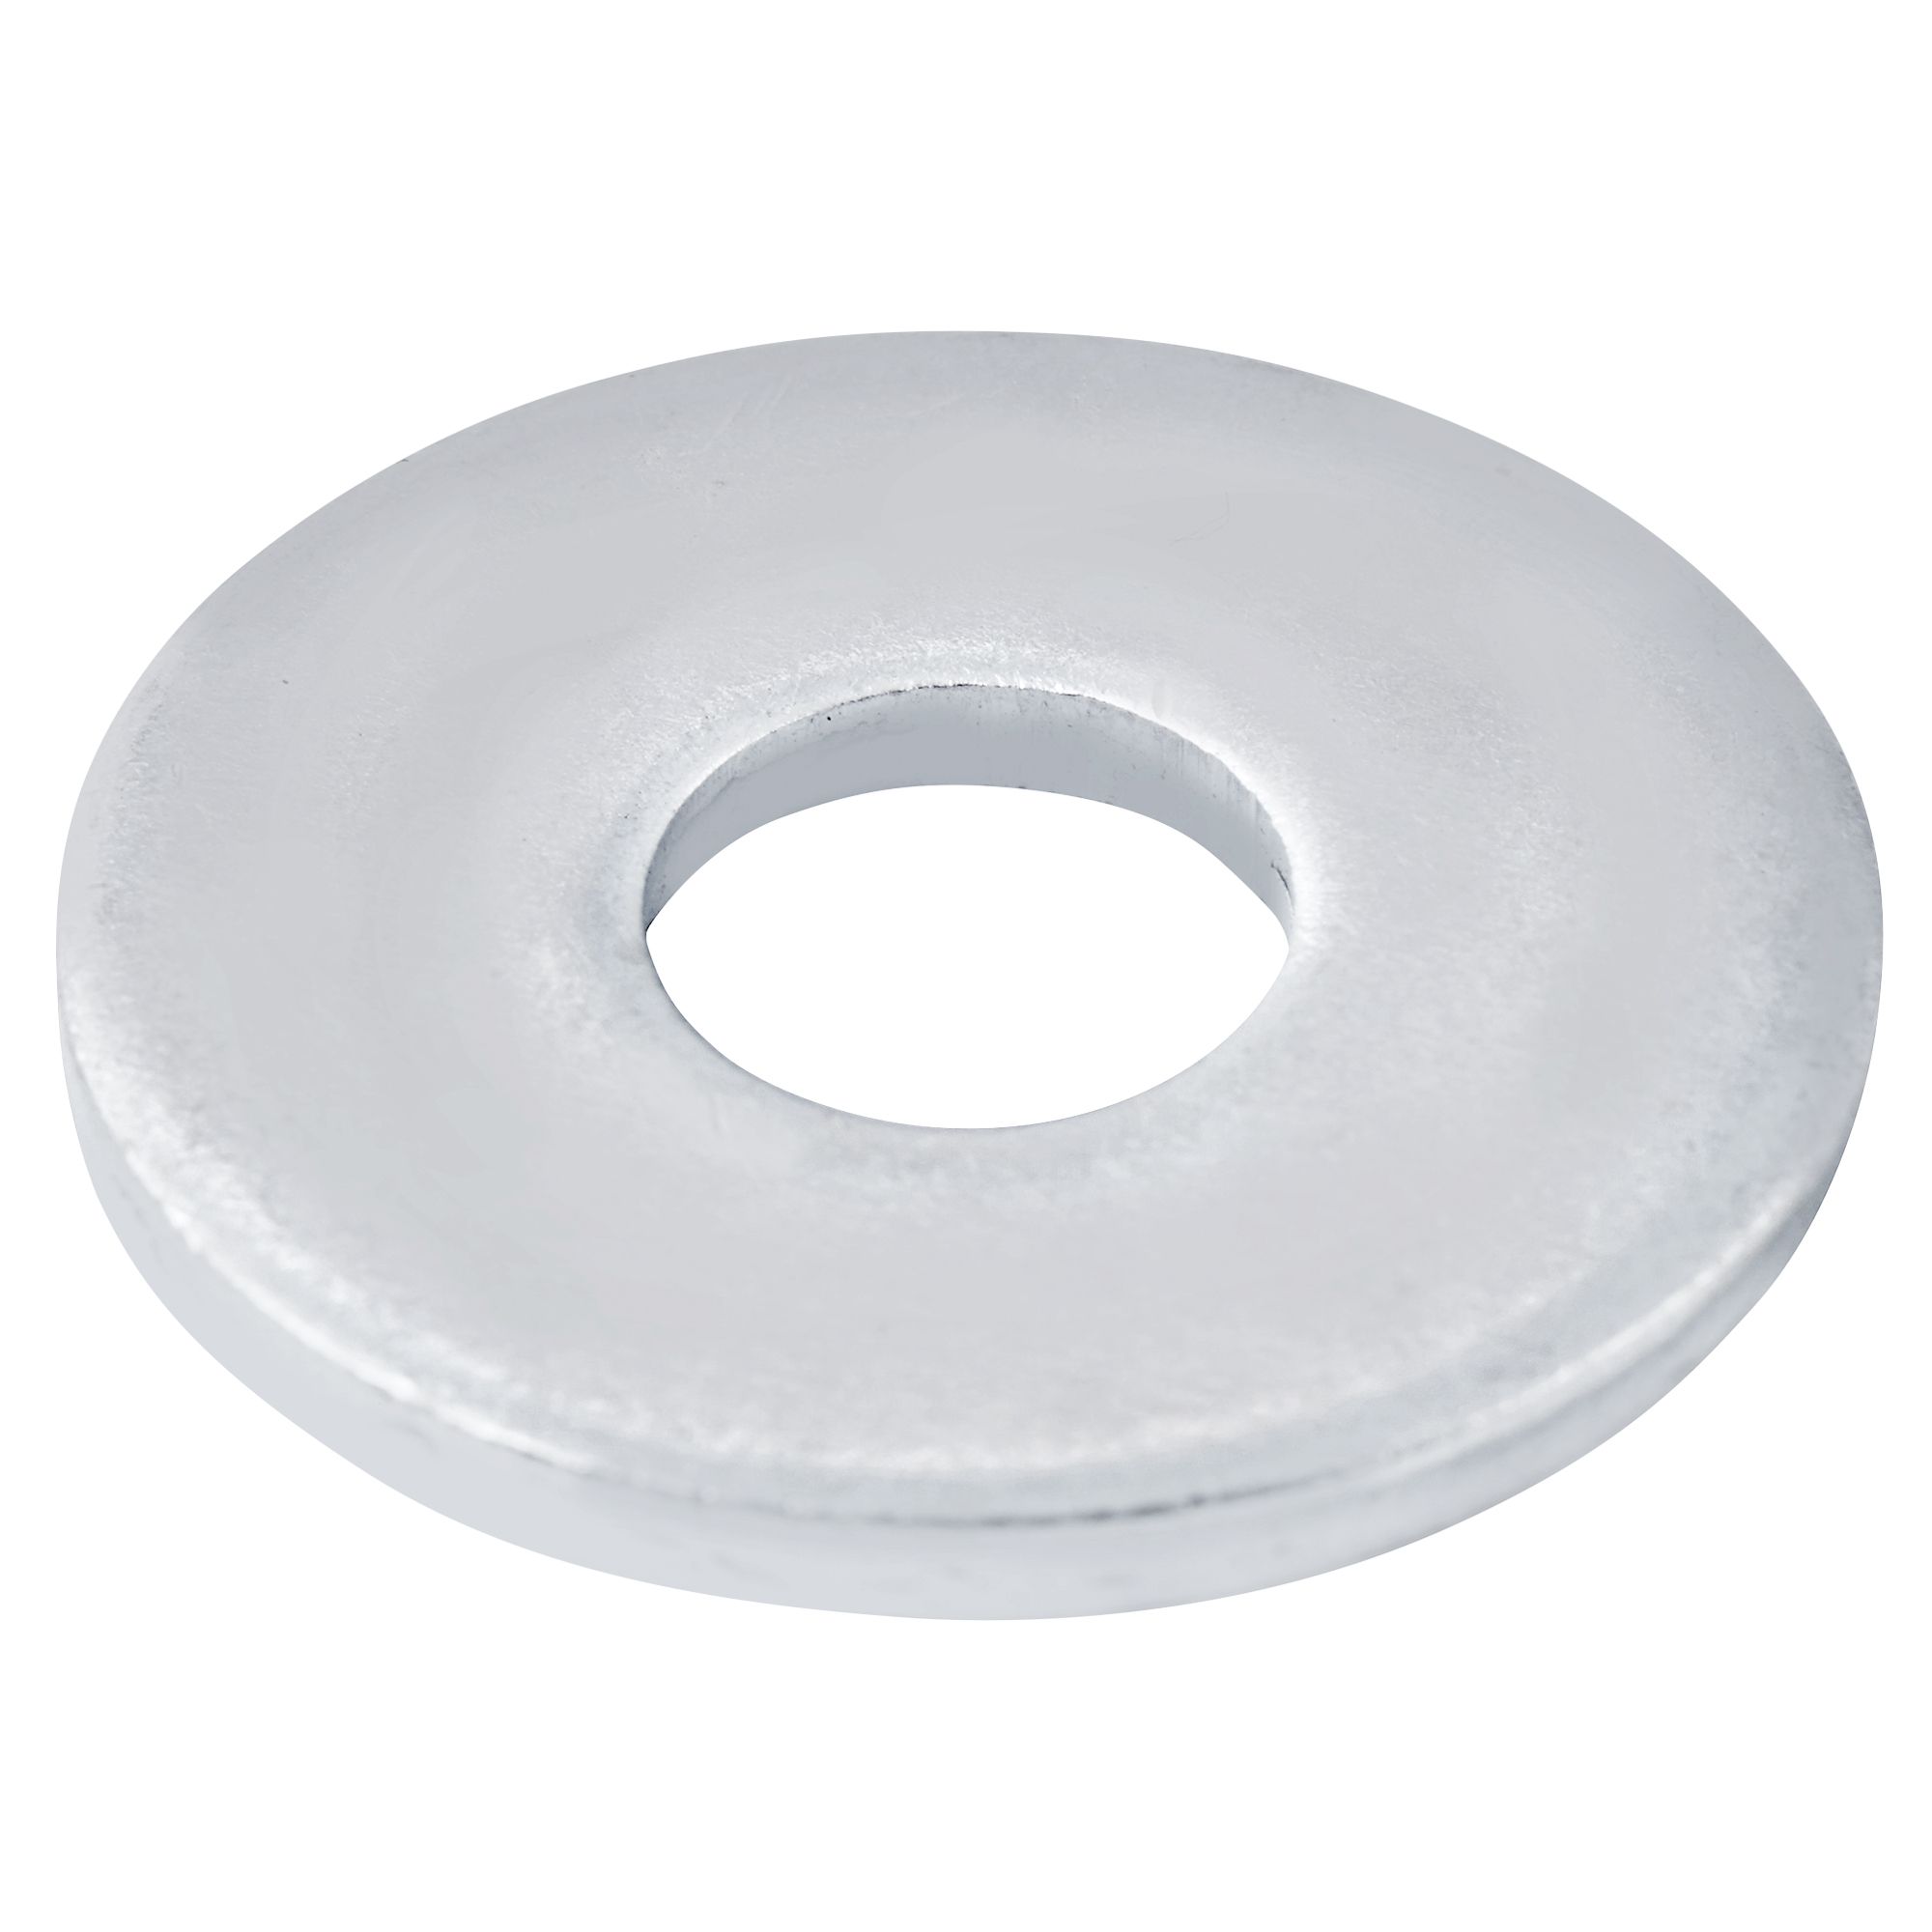 Diall M6 Carbon steel Flat Washer, (Dia)6mm, Pack of 10